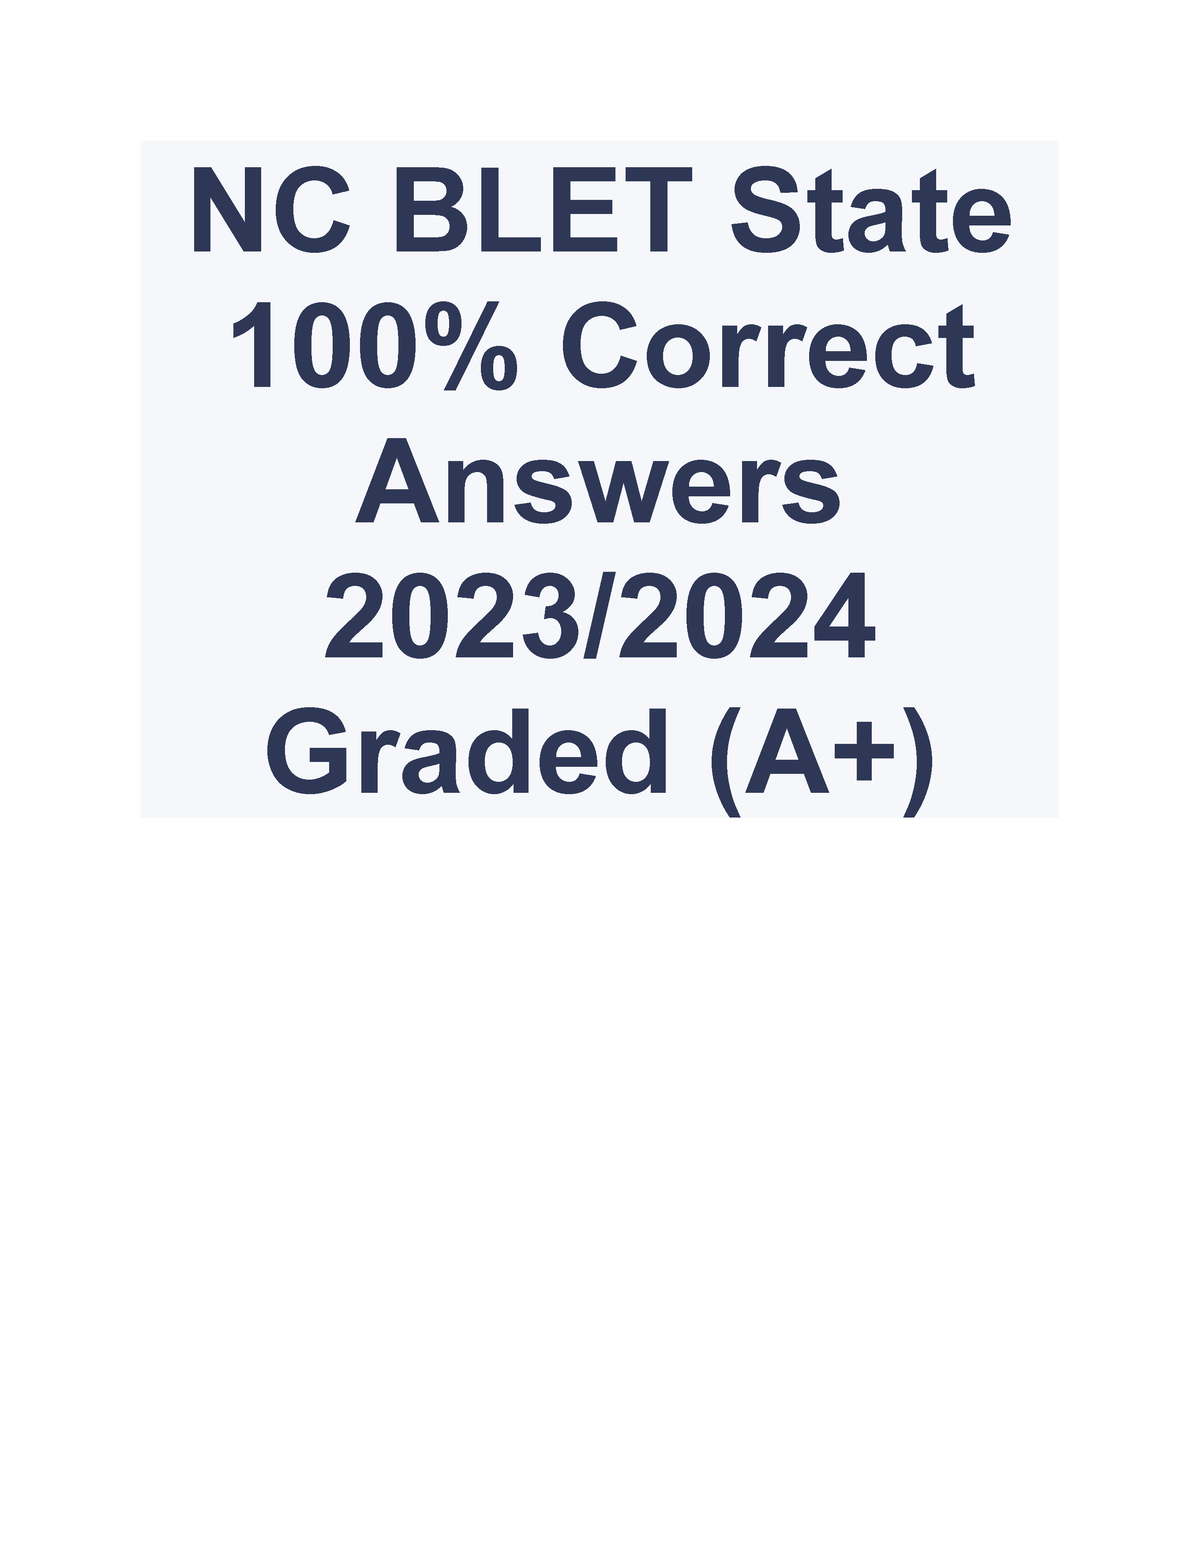 7 NC BLET State 100 Correct Answers 20232024 Graded (A+) NC BLET